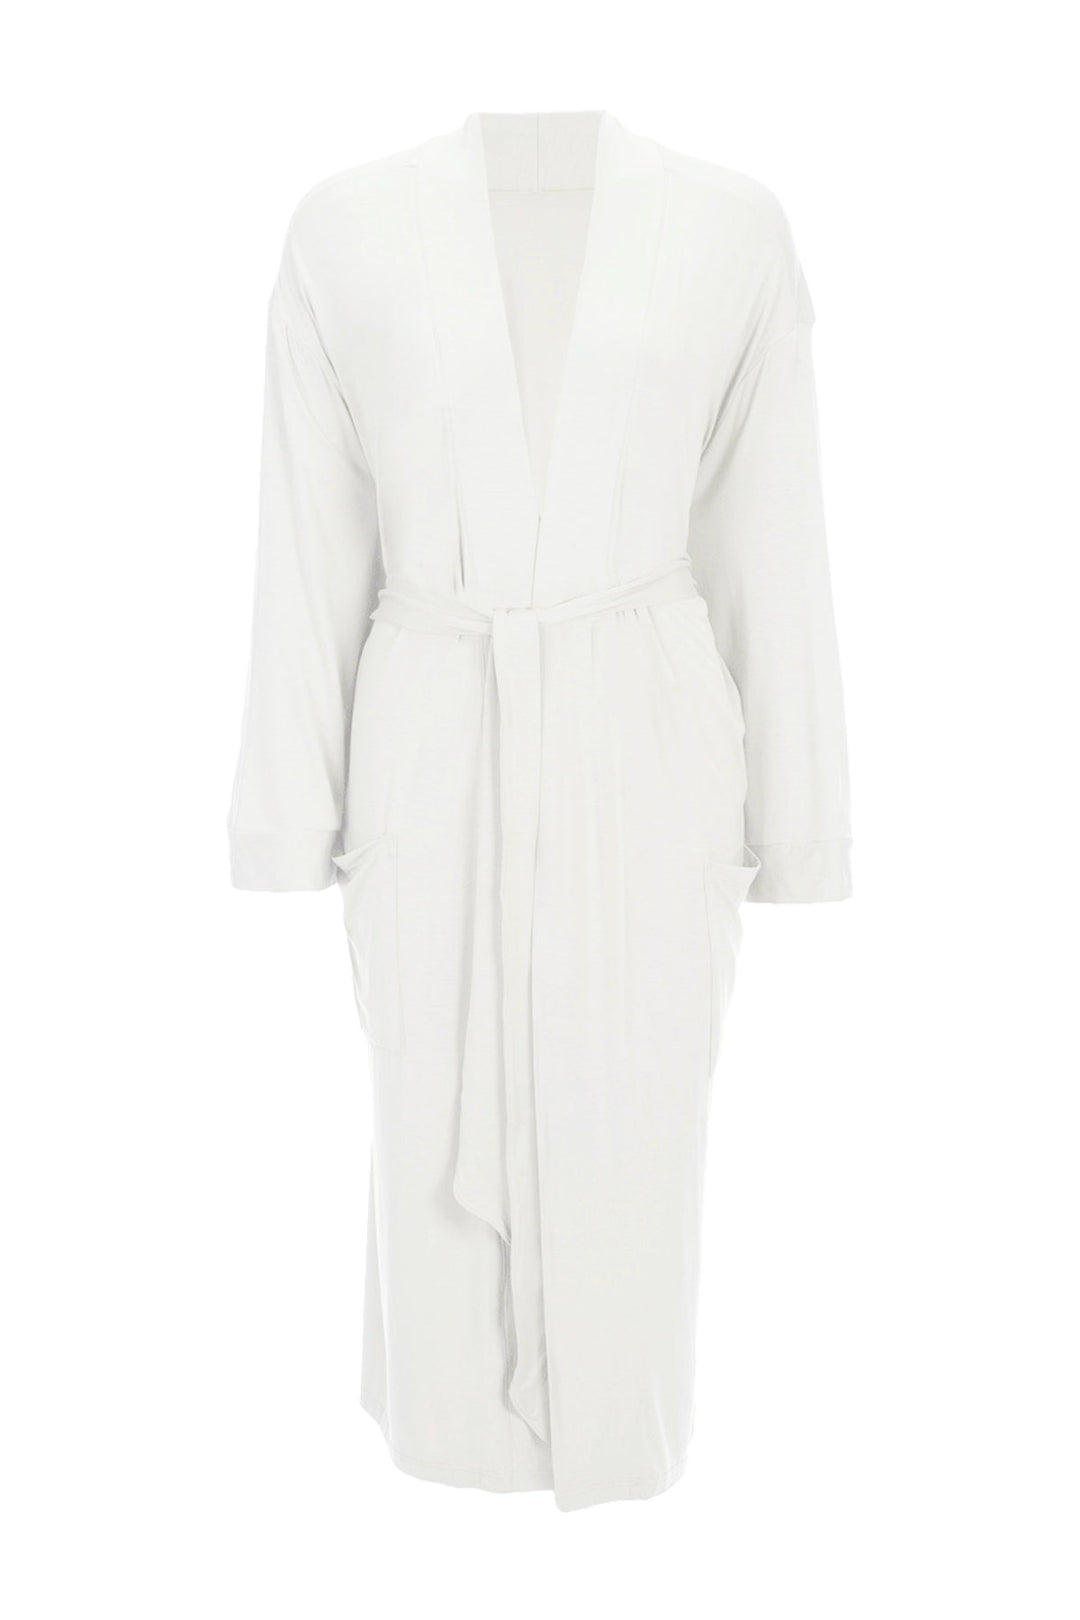 Zoe bamboo jersey robe in natural